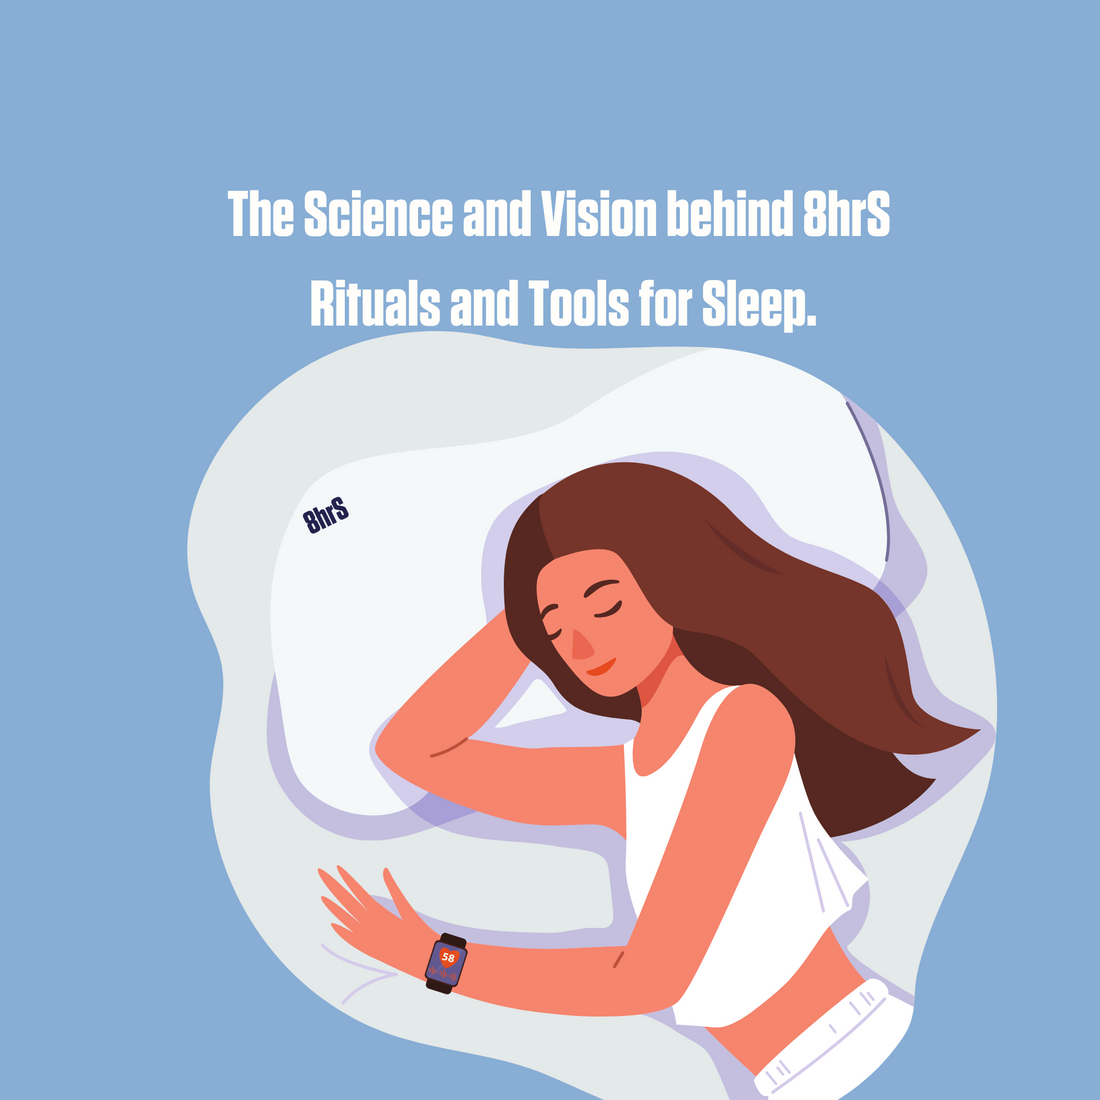 The Science and Vision behind our Rituals and Tools for Sleep.